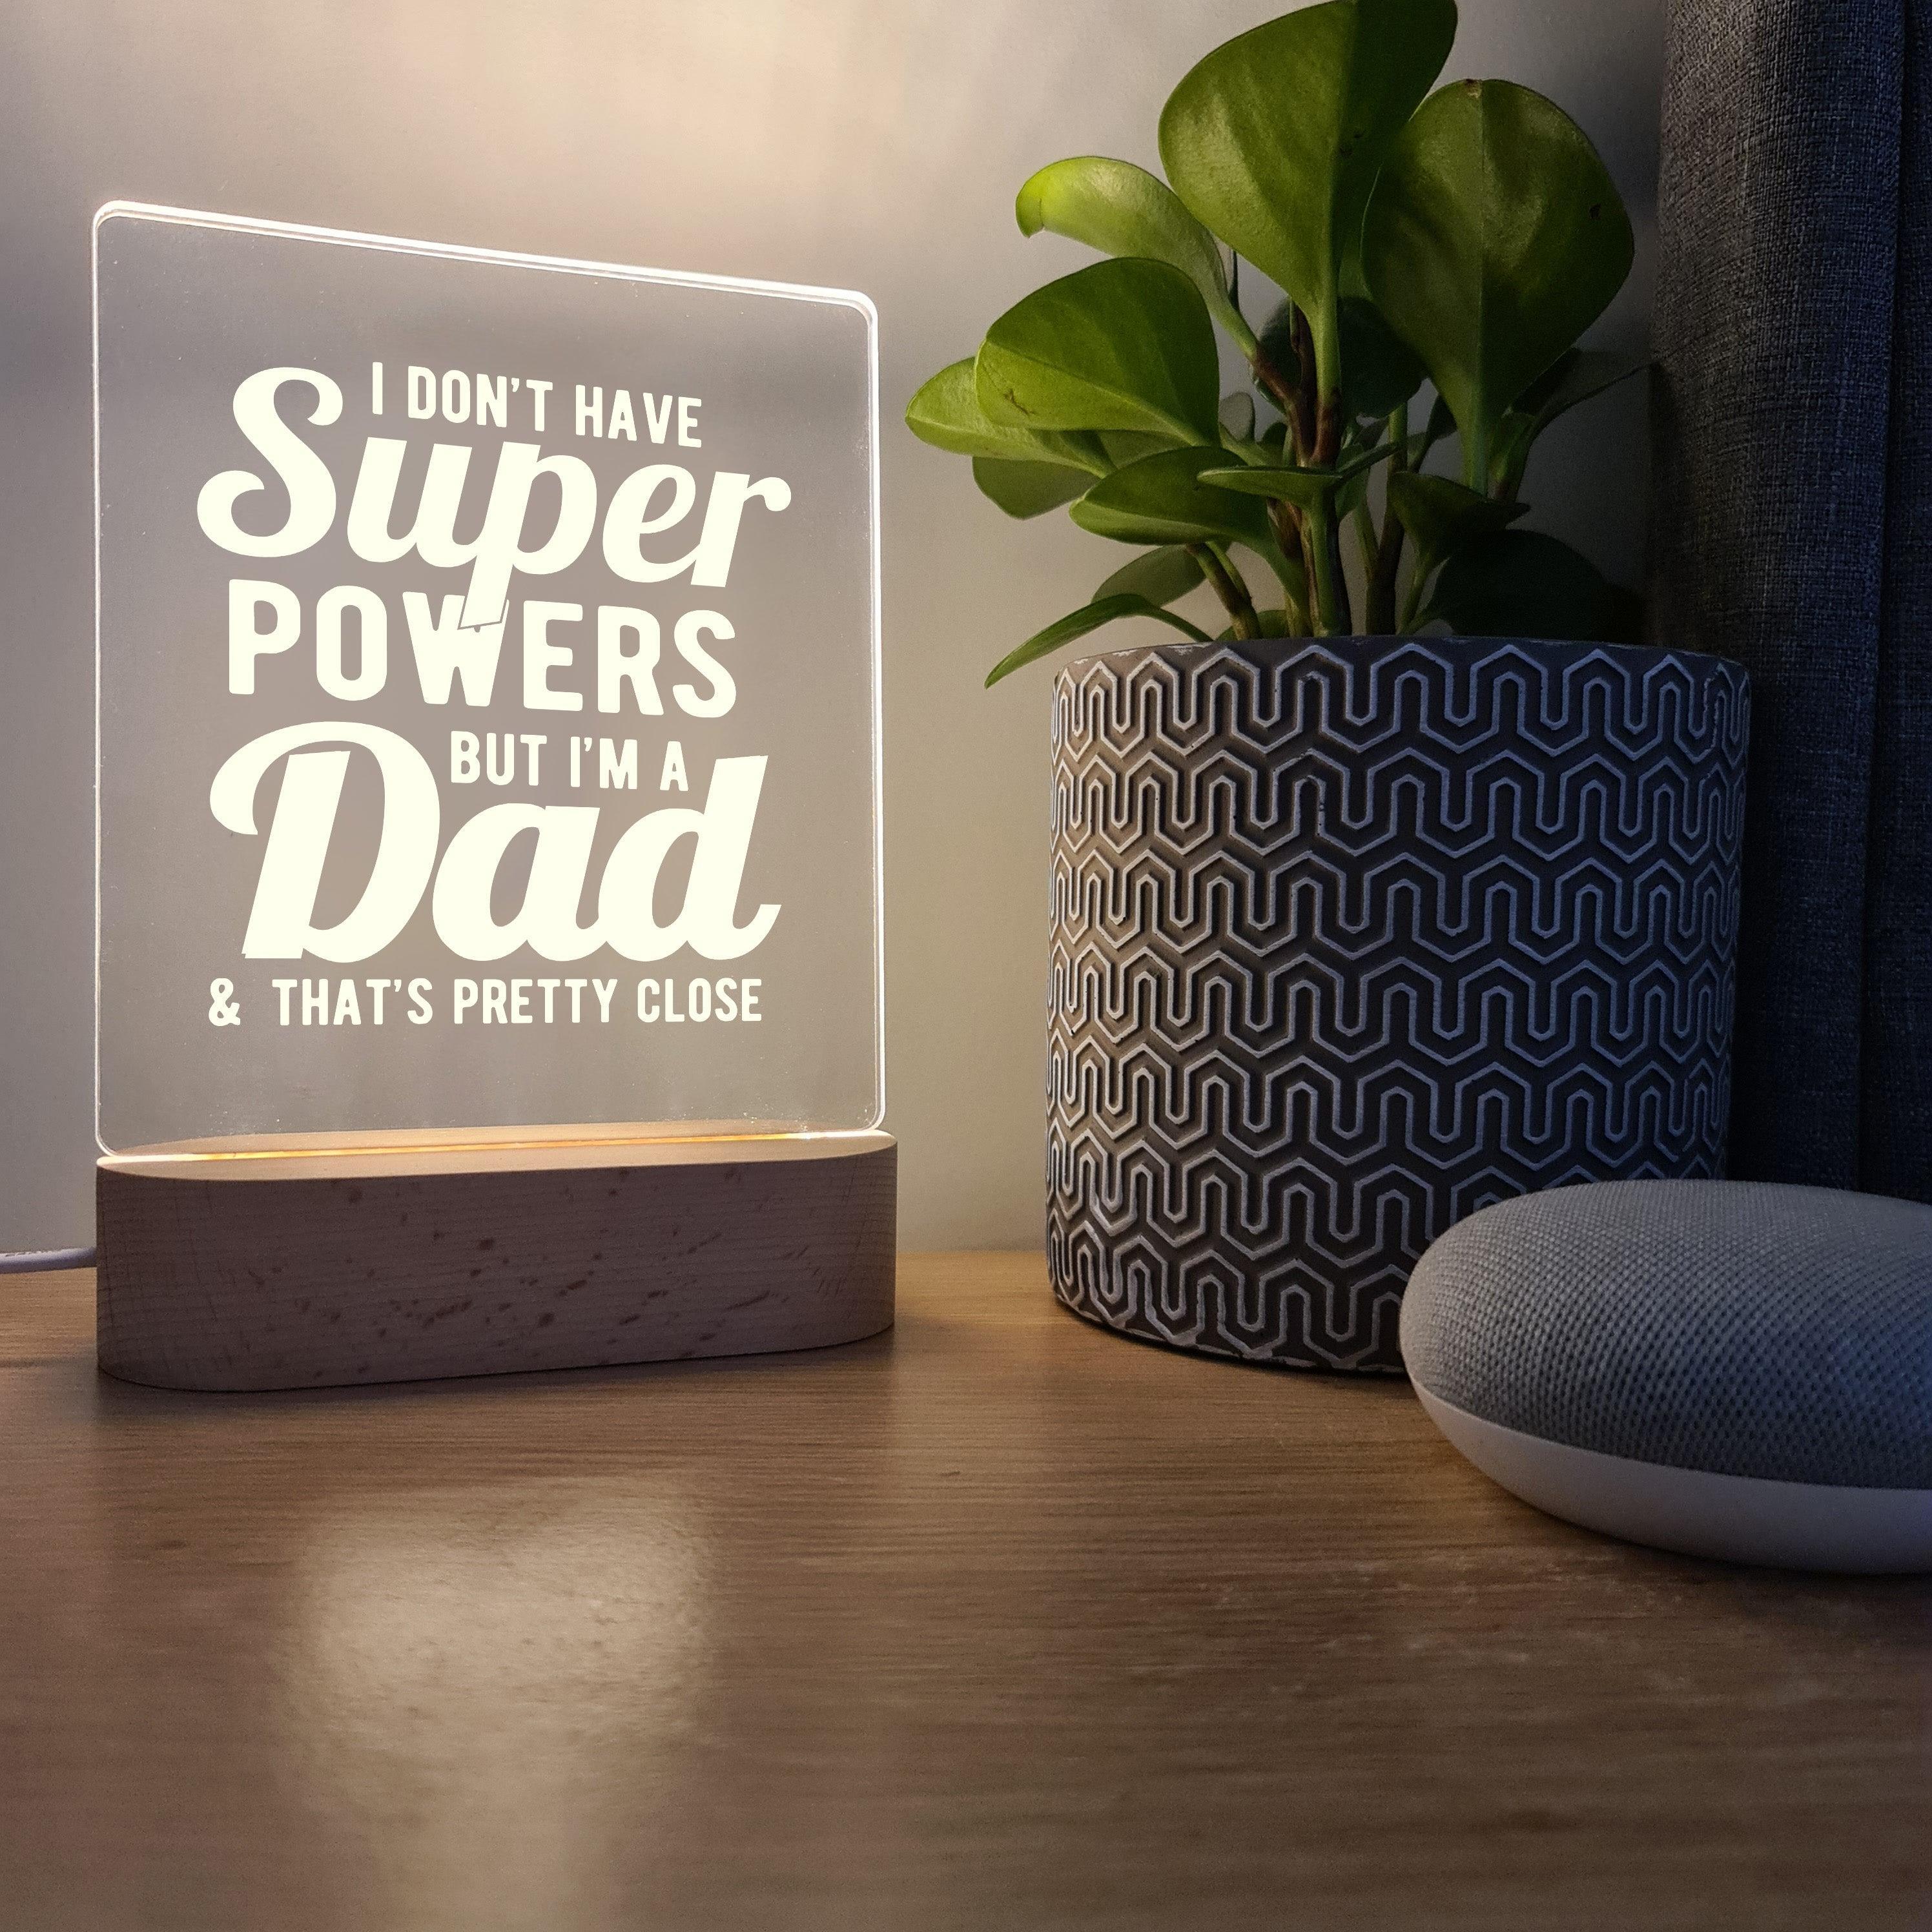 I'm A Dad & That's Pretty Close - Father's Day Night Light - The Willow Corner